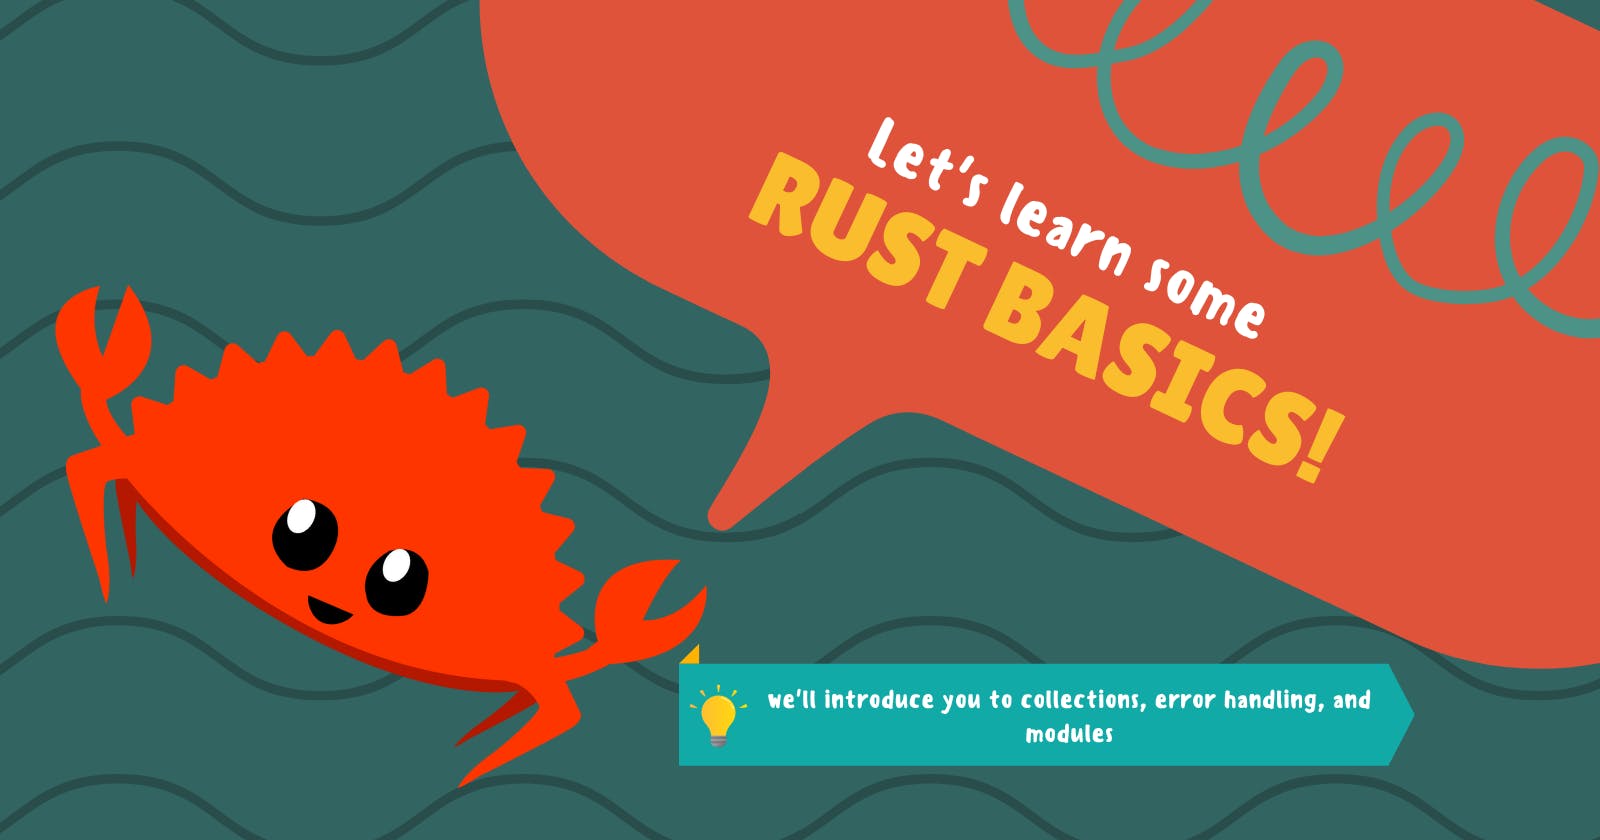 Rust for Beginners: Making New Friends with Collections, Error Handling, and Modules